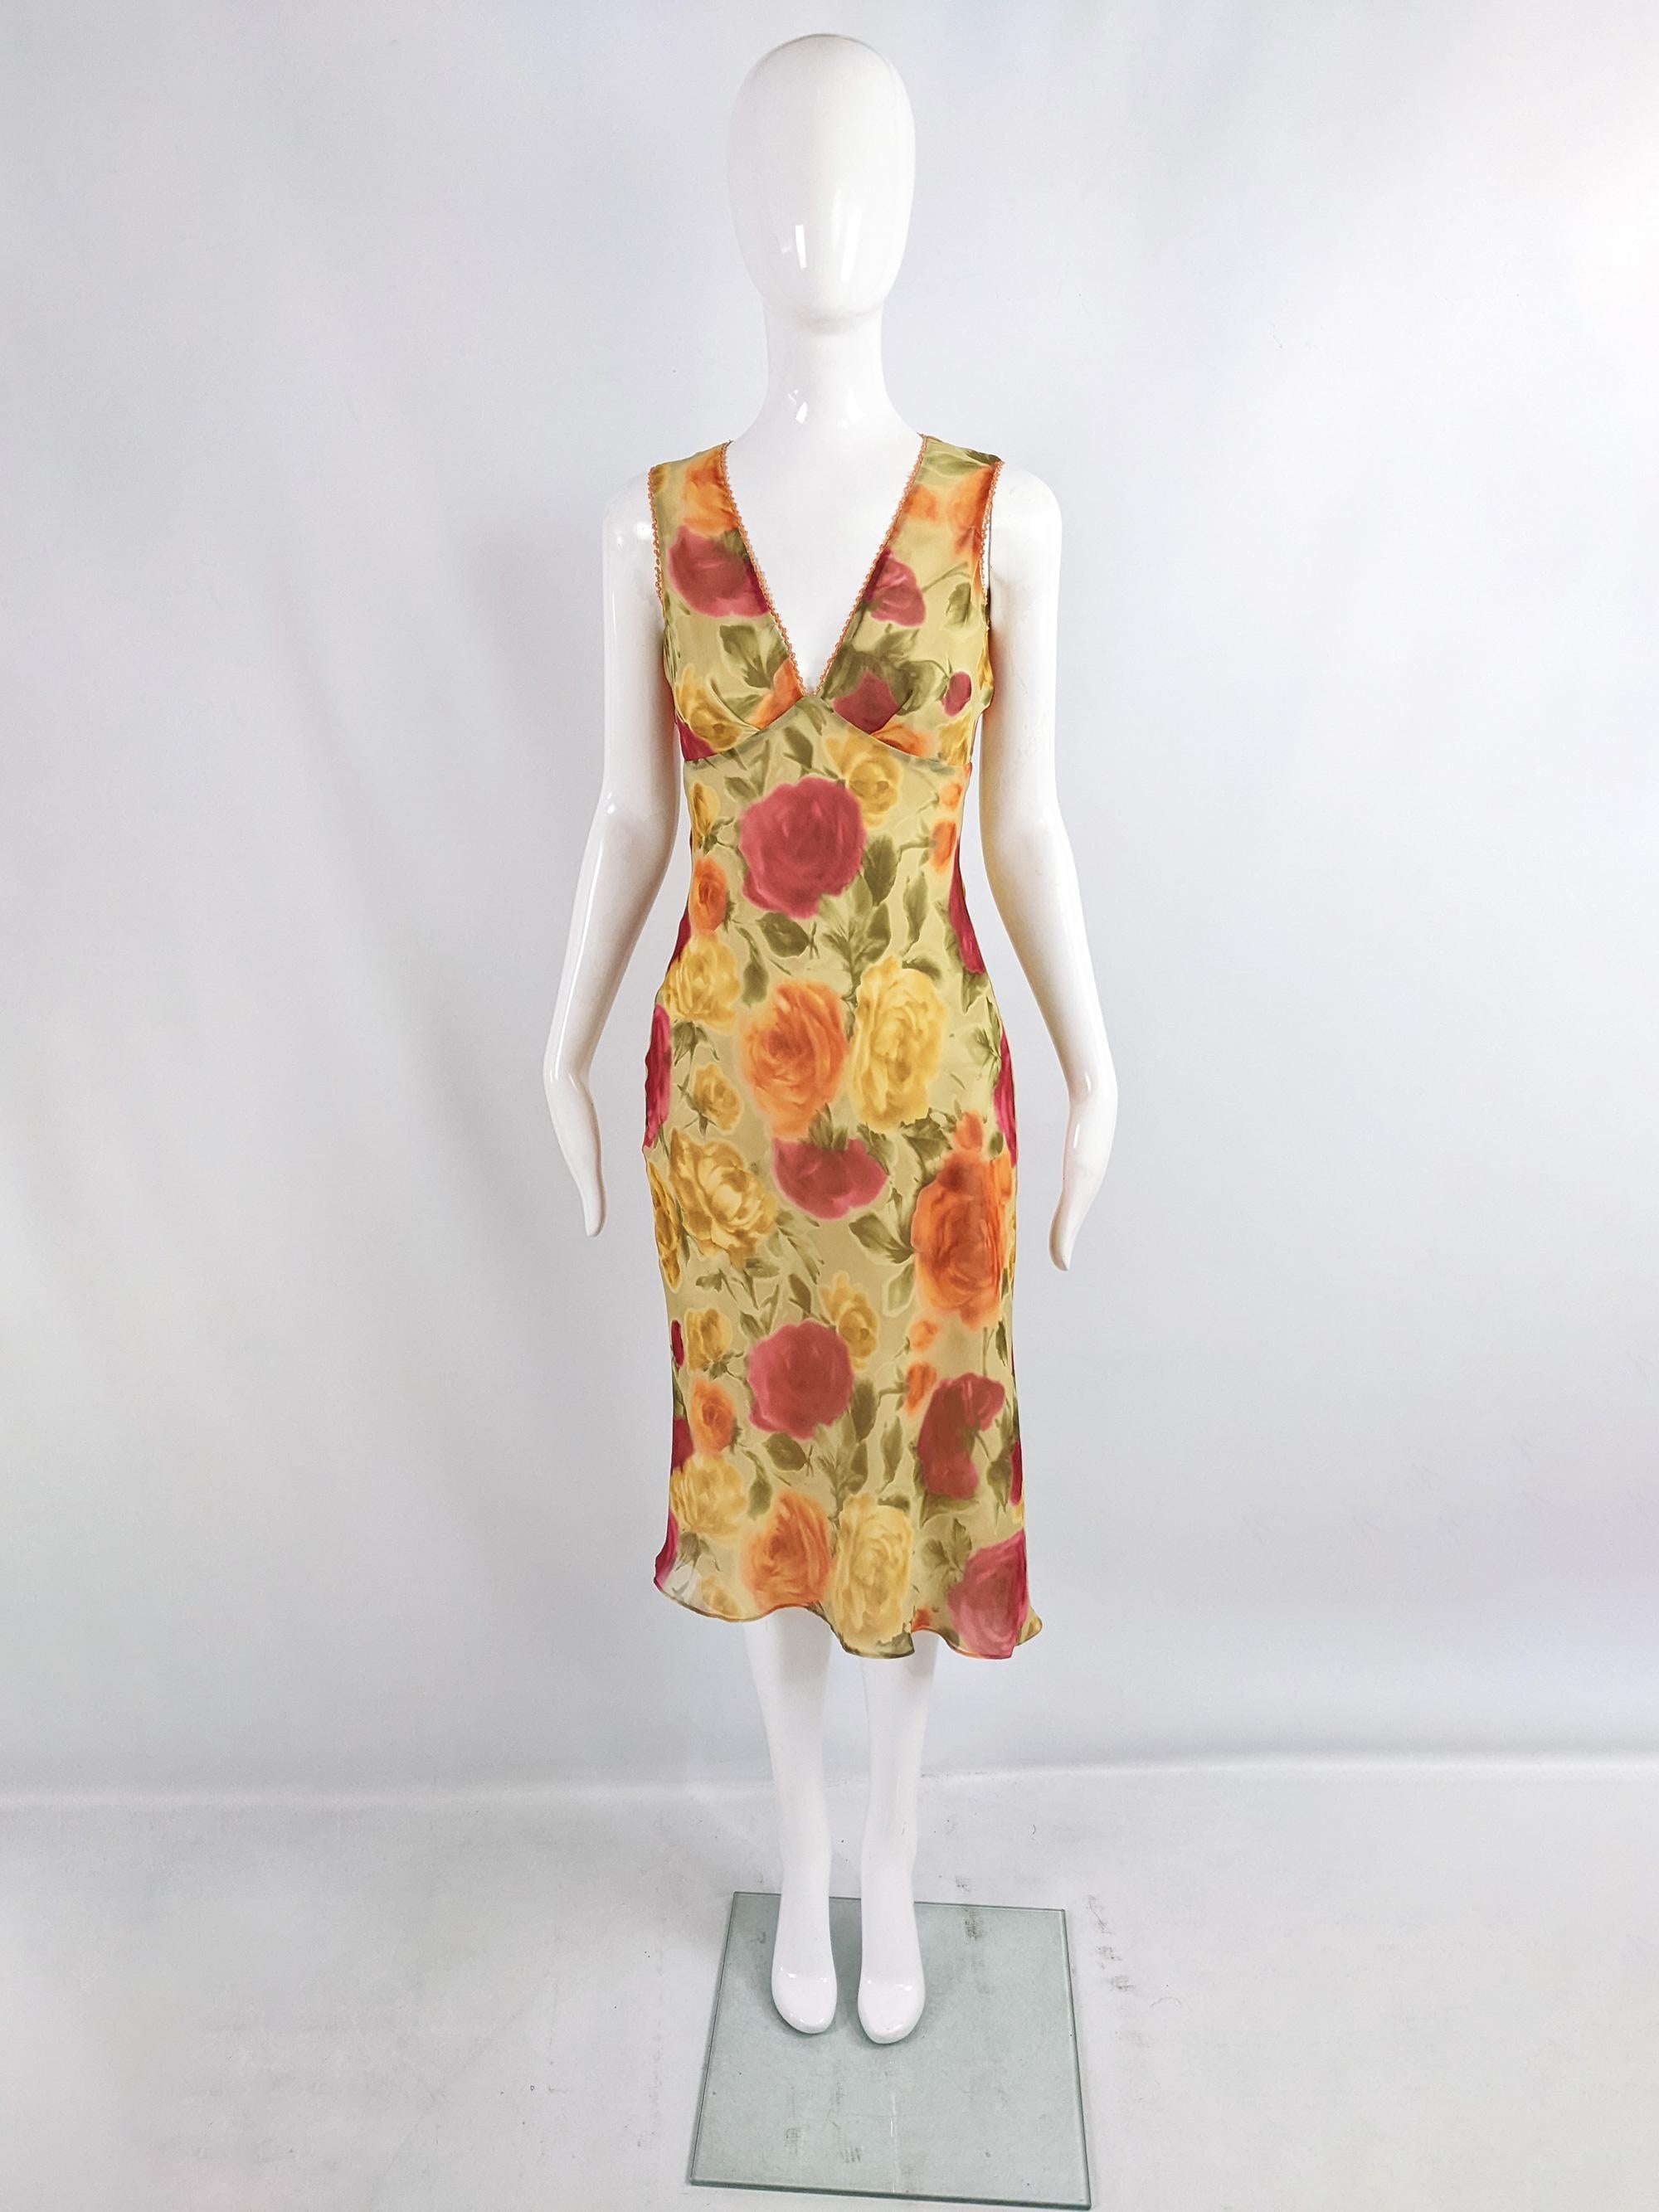 Size: Marked UK 10 which equates to a US 6/ EU 40. Please check measurements.
Bust - 36” / 91cm
Waist - 30” / 76cm
Hips - 38” / 96cm
Length (Shoulder to Hem) - 46” / 117cm

A pretty vintage dress from the early 2000s by luxury British fashion